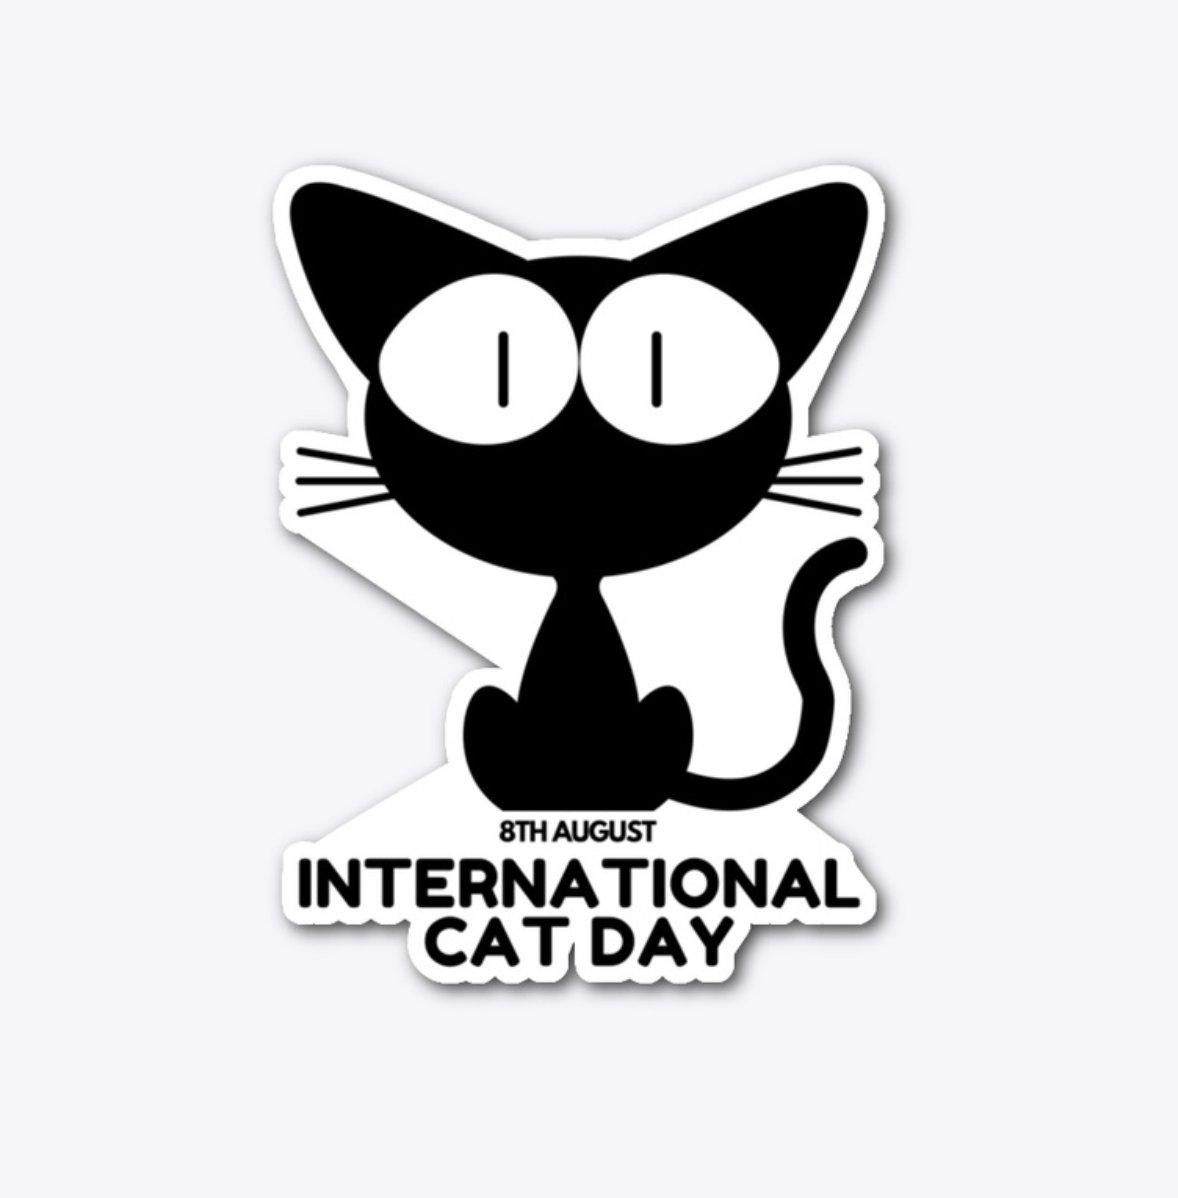 Celebrate International Cat day on the 8th August by grabbing a Meow T-shirt or Coffee Mug or a Sticker etc here at - https://t.co/SpbmIBxuTe https://t.co/YaKBMcs5gU